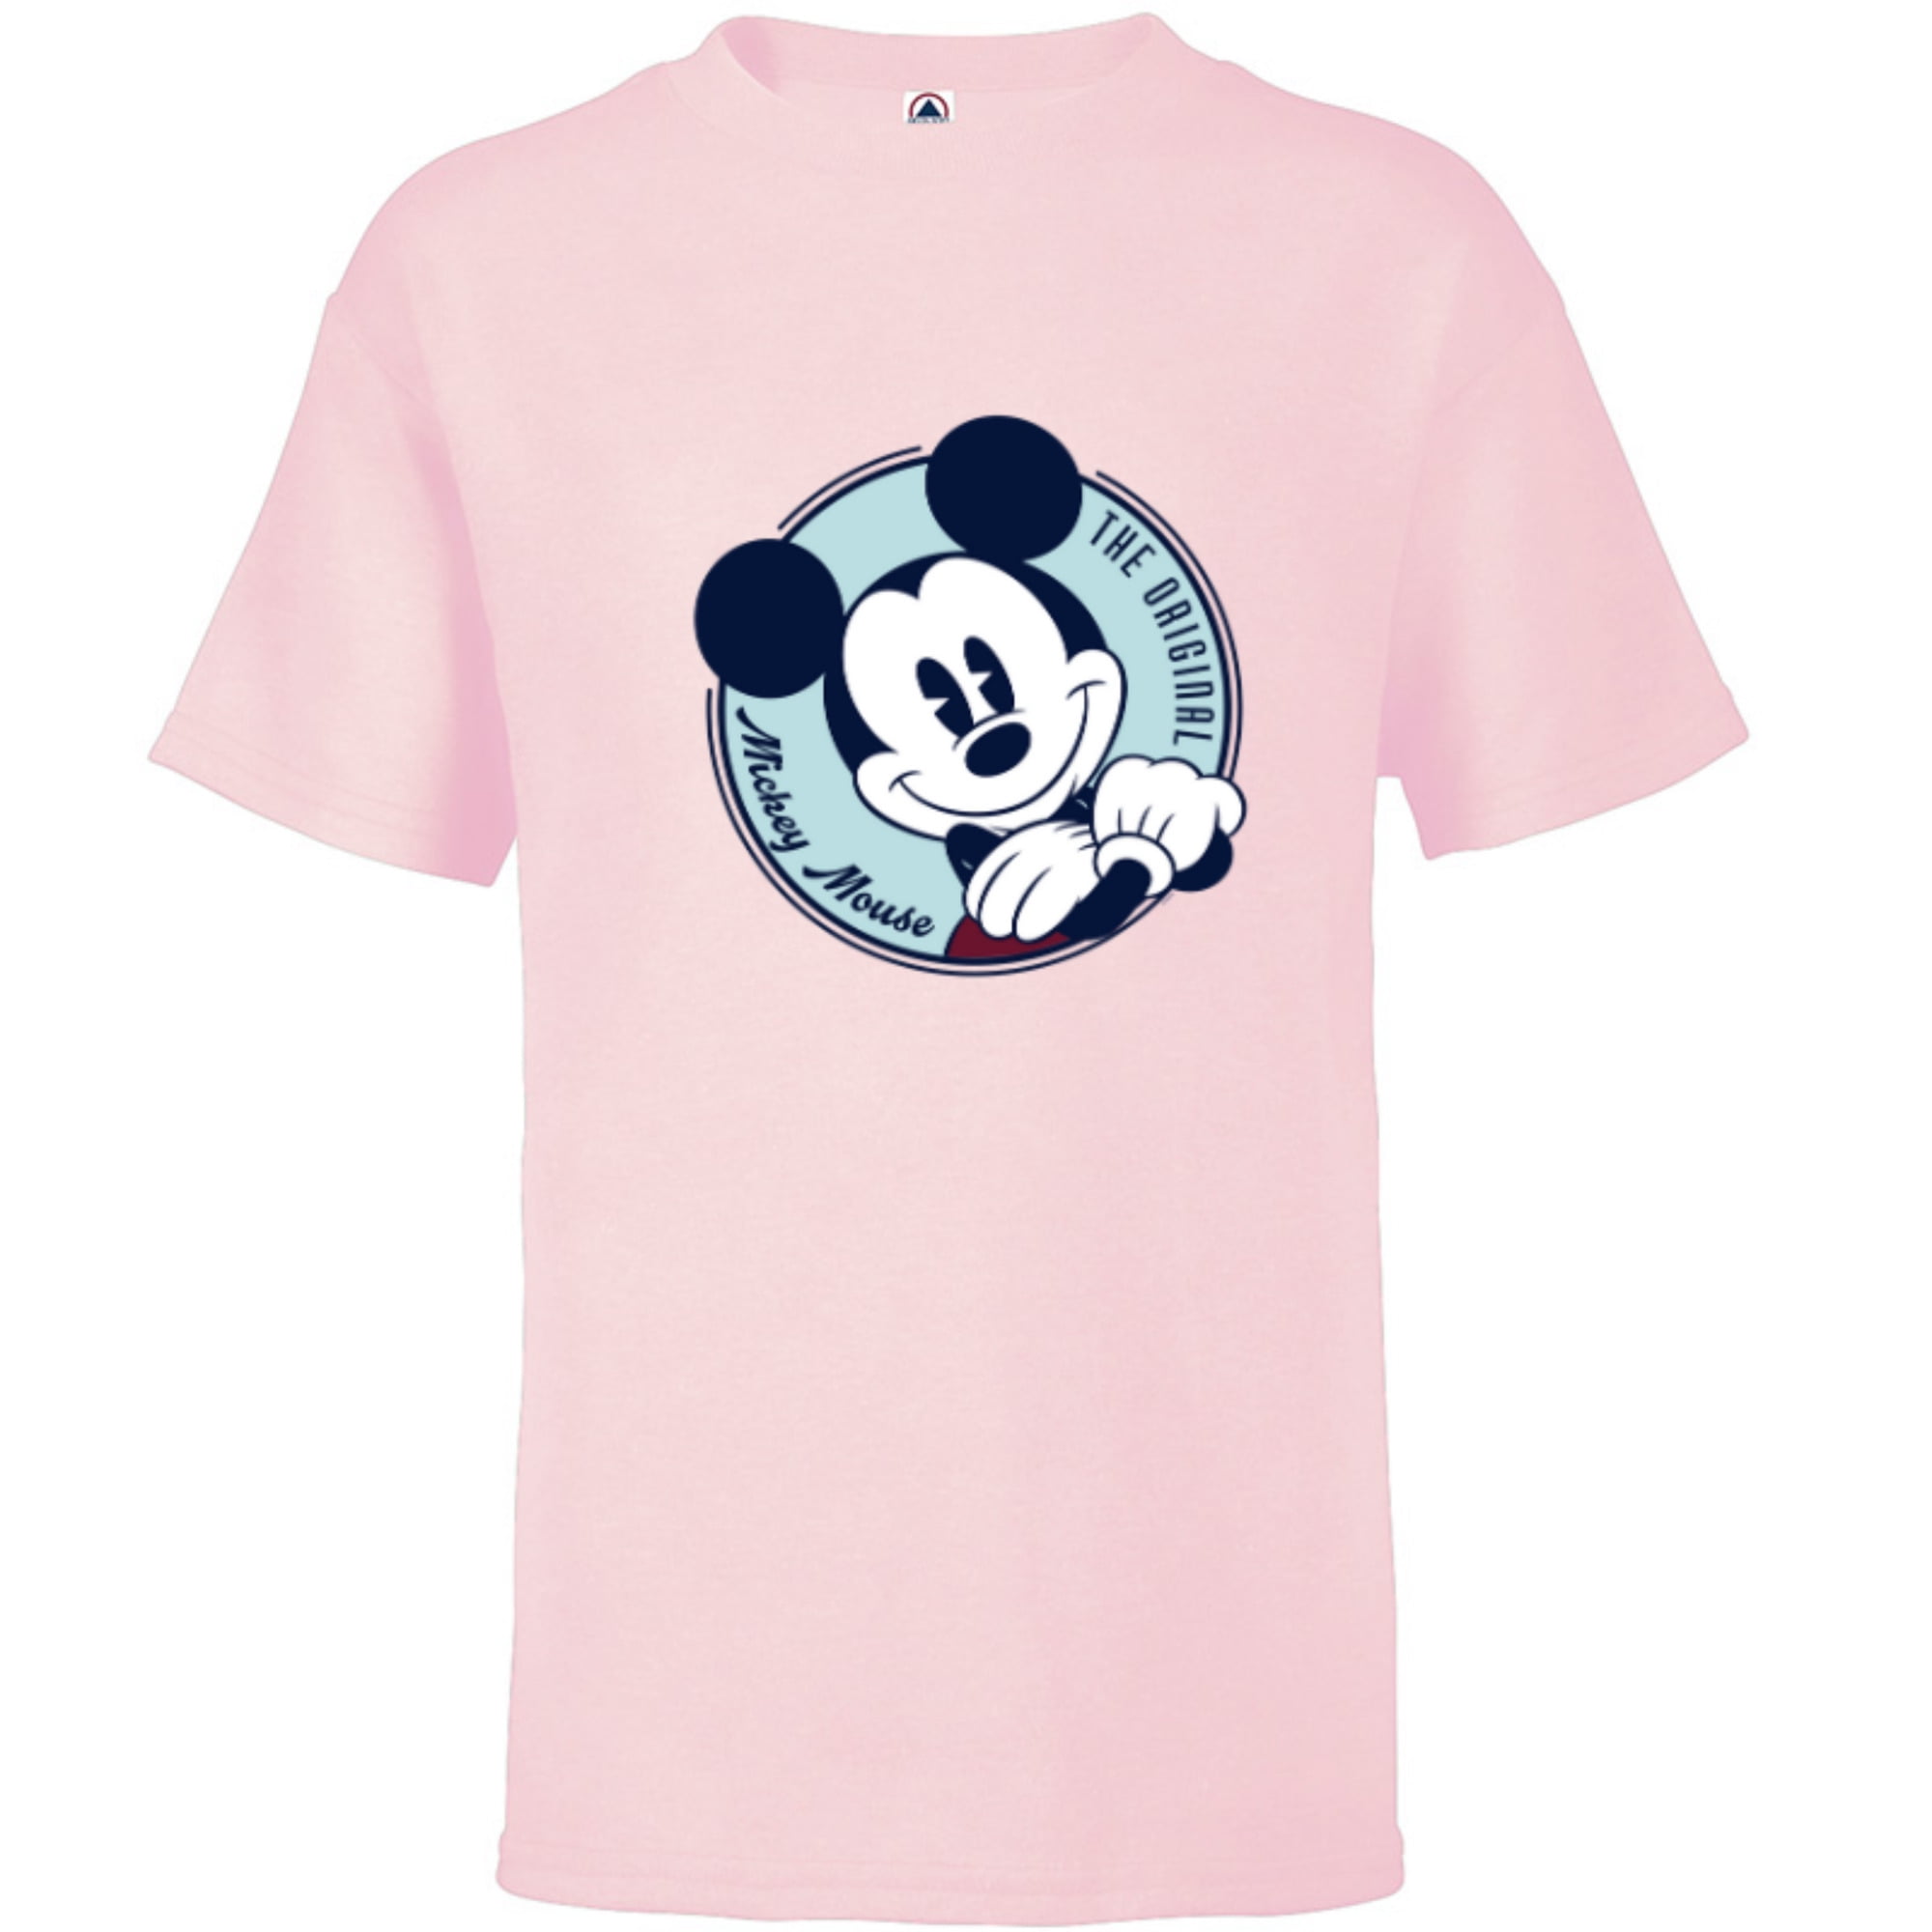 T-Shirt Kids Mickey for - Original Sleeve The Vintage Retro Mouse - Disney Pink Customized-Soft Short